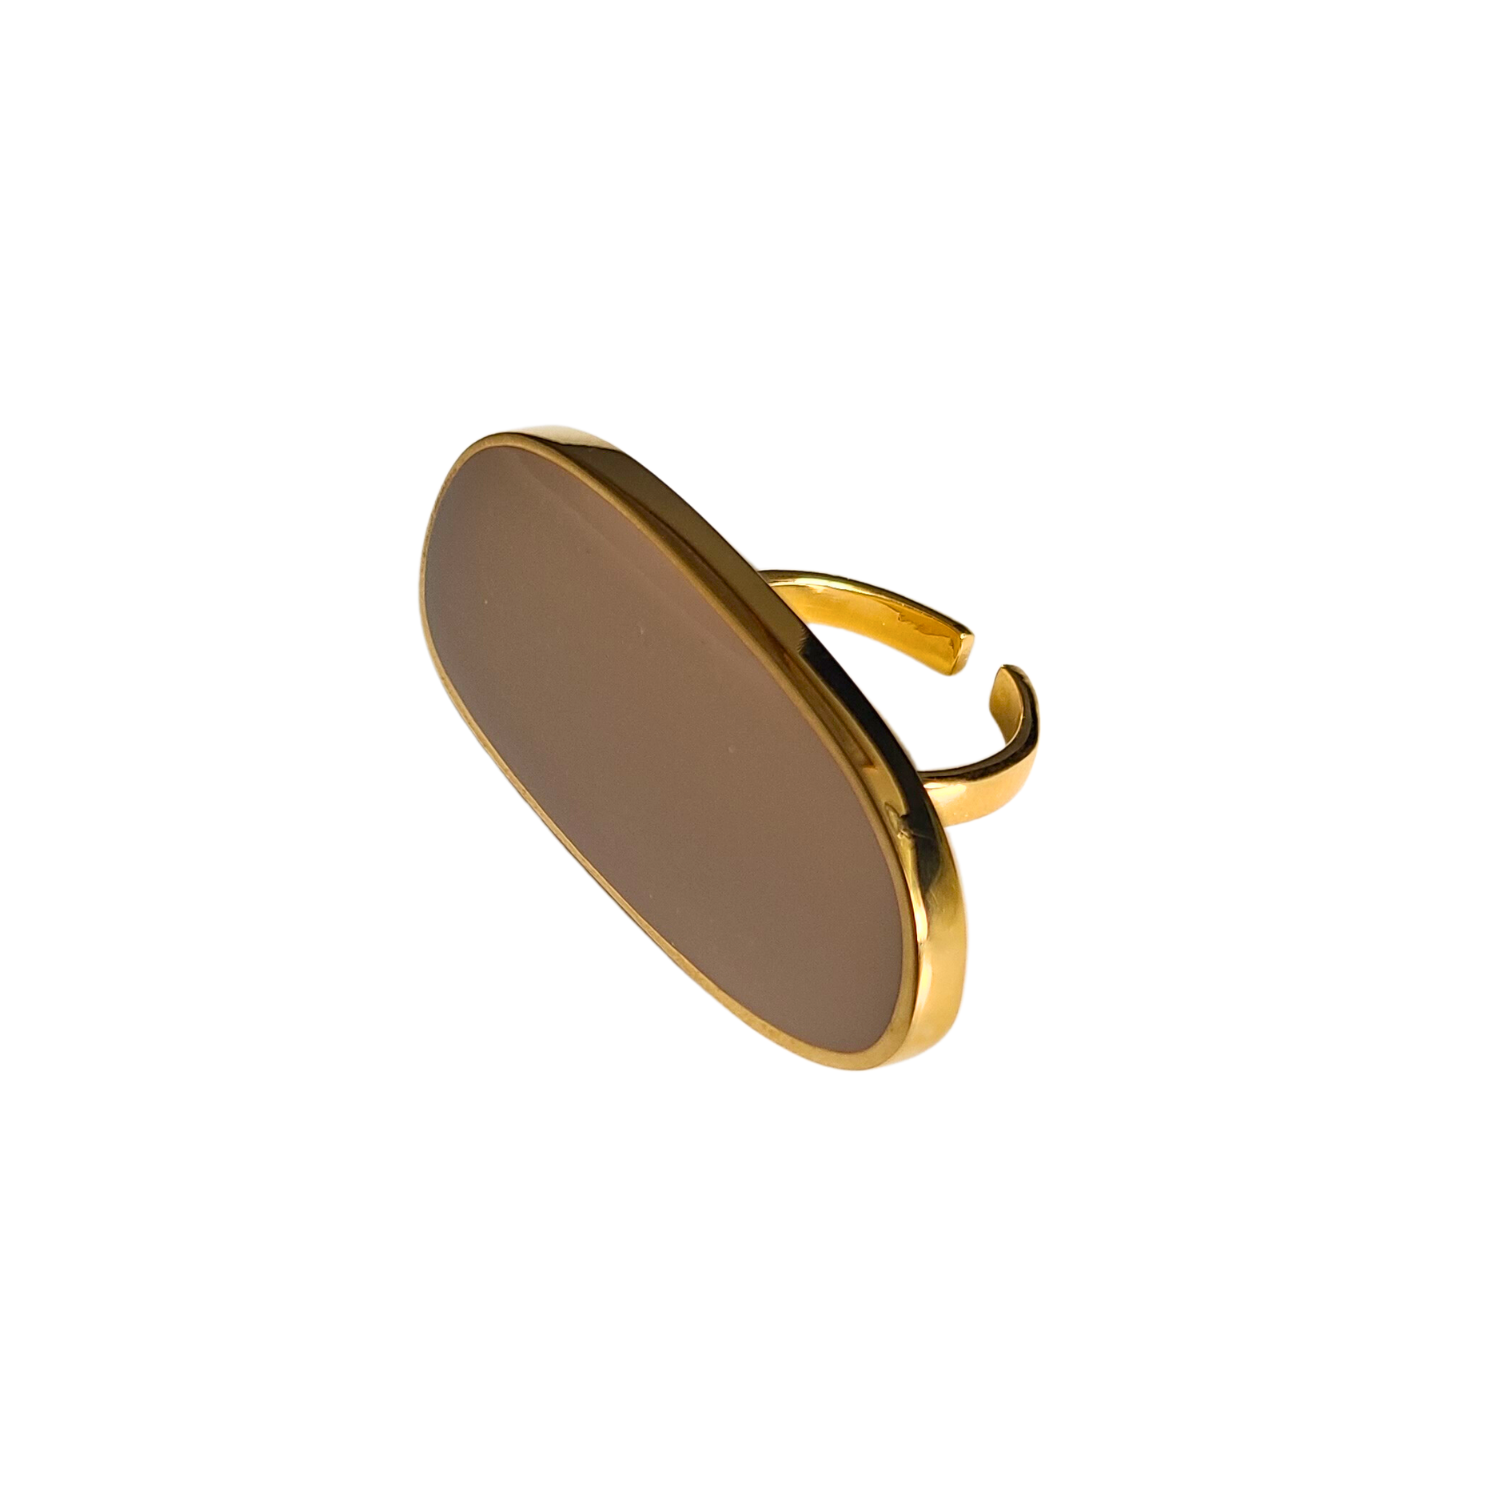 Unique chunky gold/beige ring crafted with meticulous attention to detail, creating a standout piece.